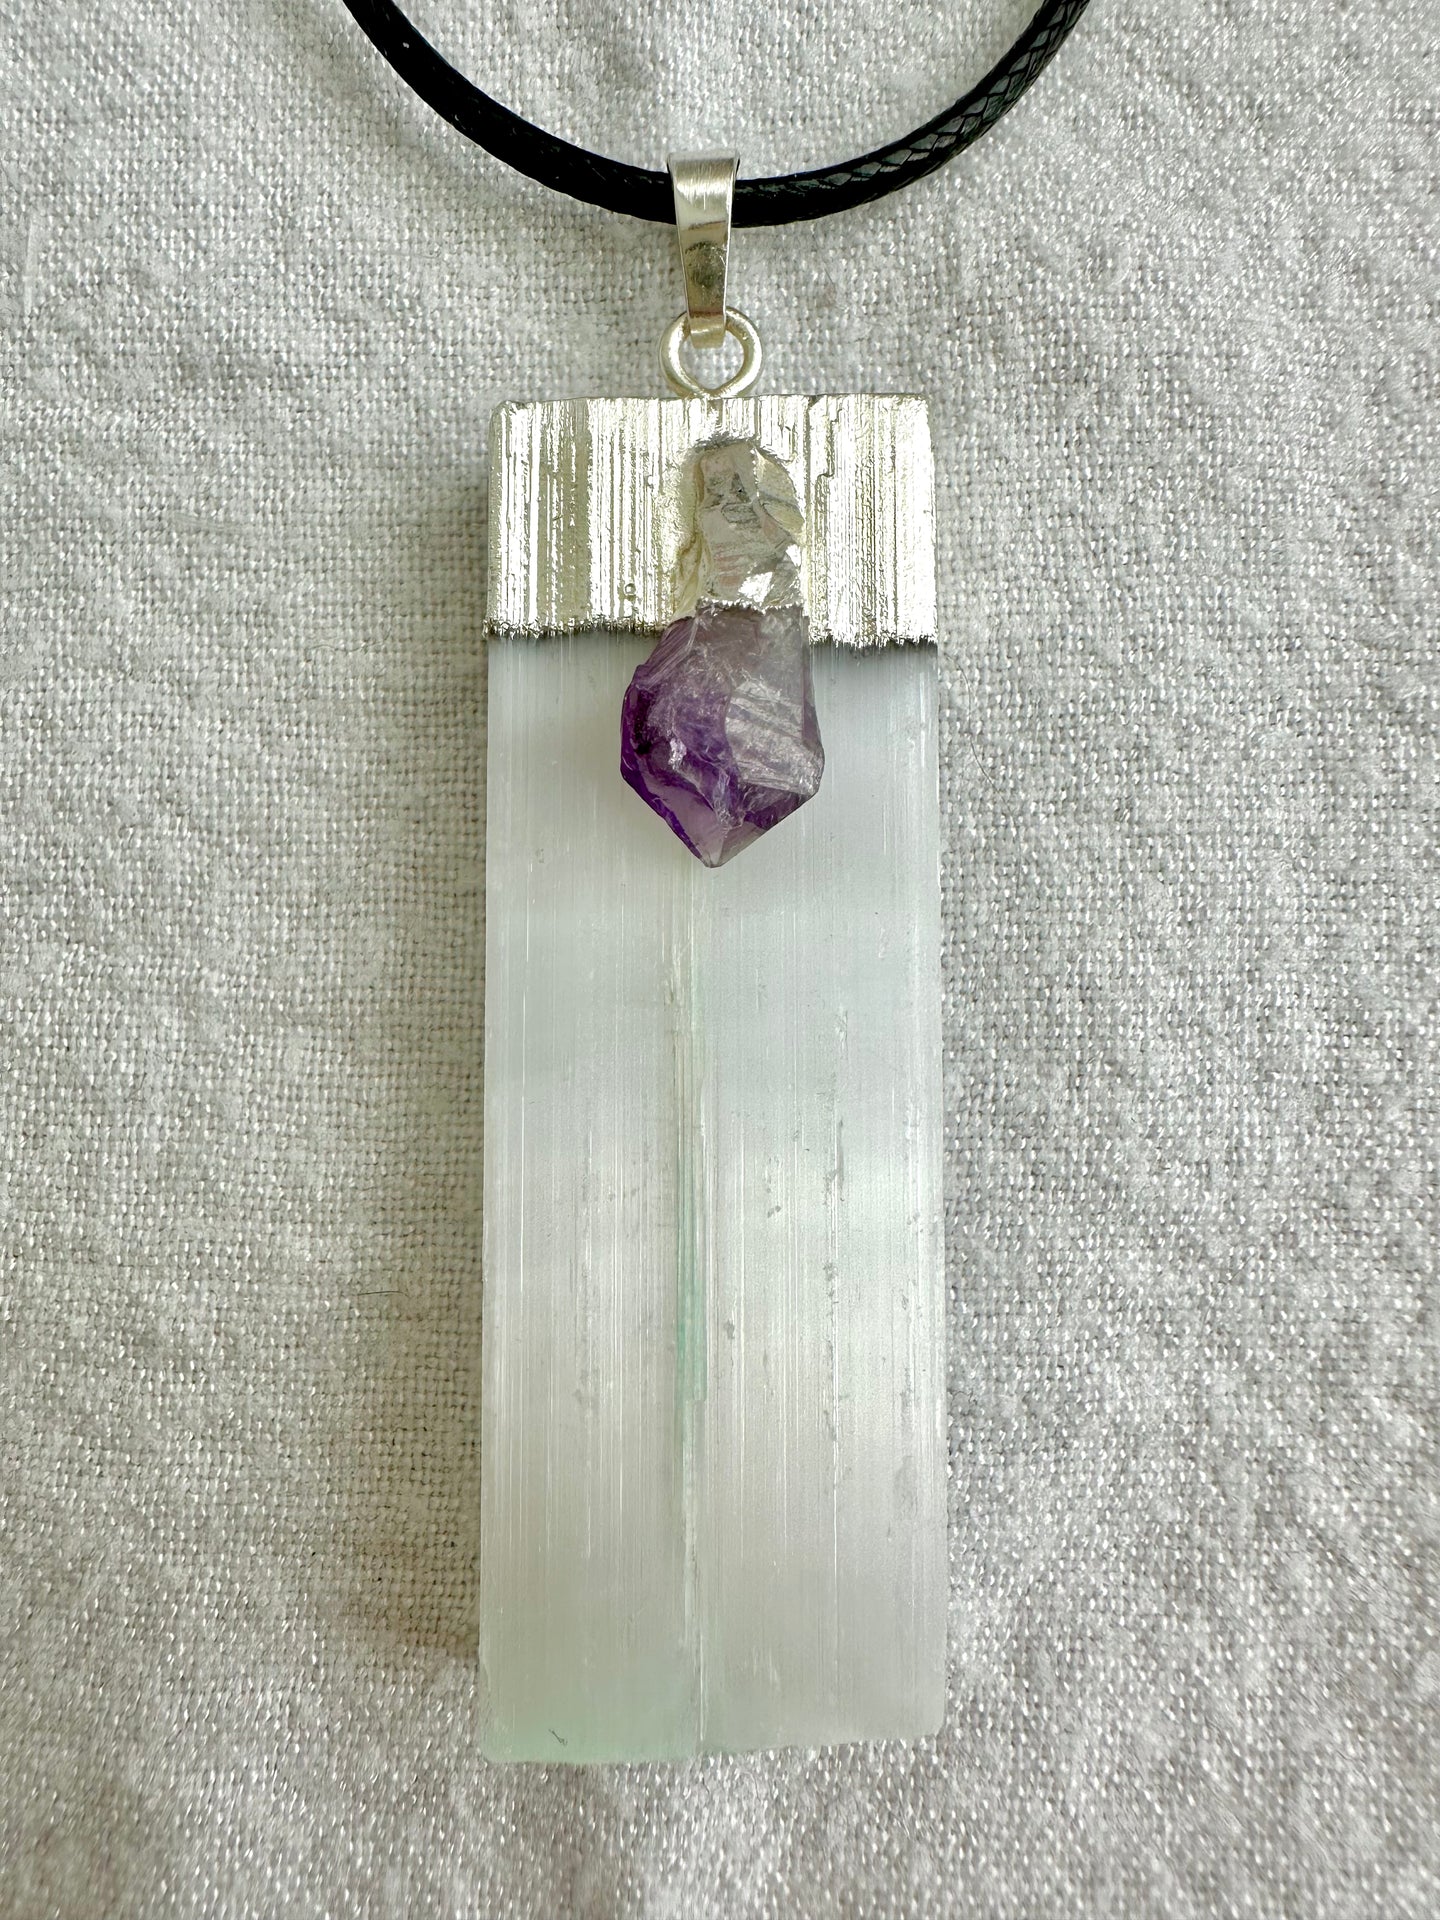 Selenite and Amethyst Necklace